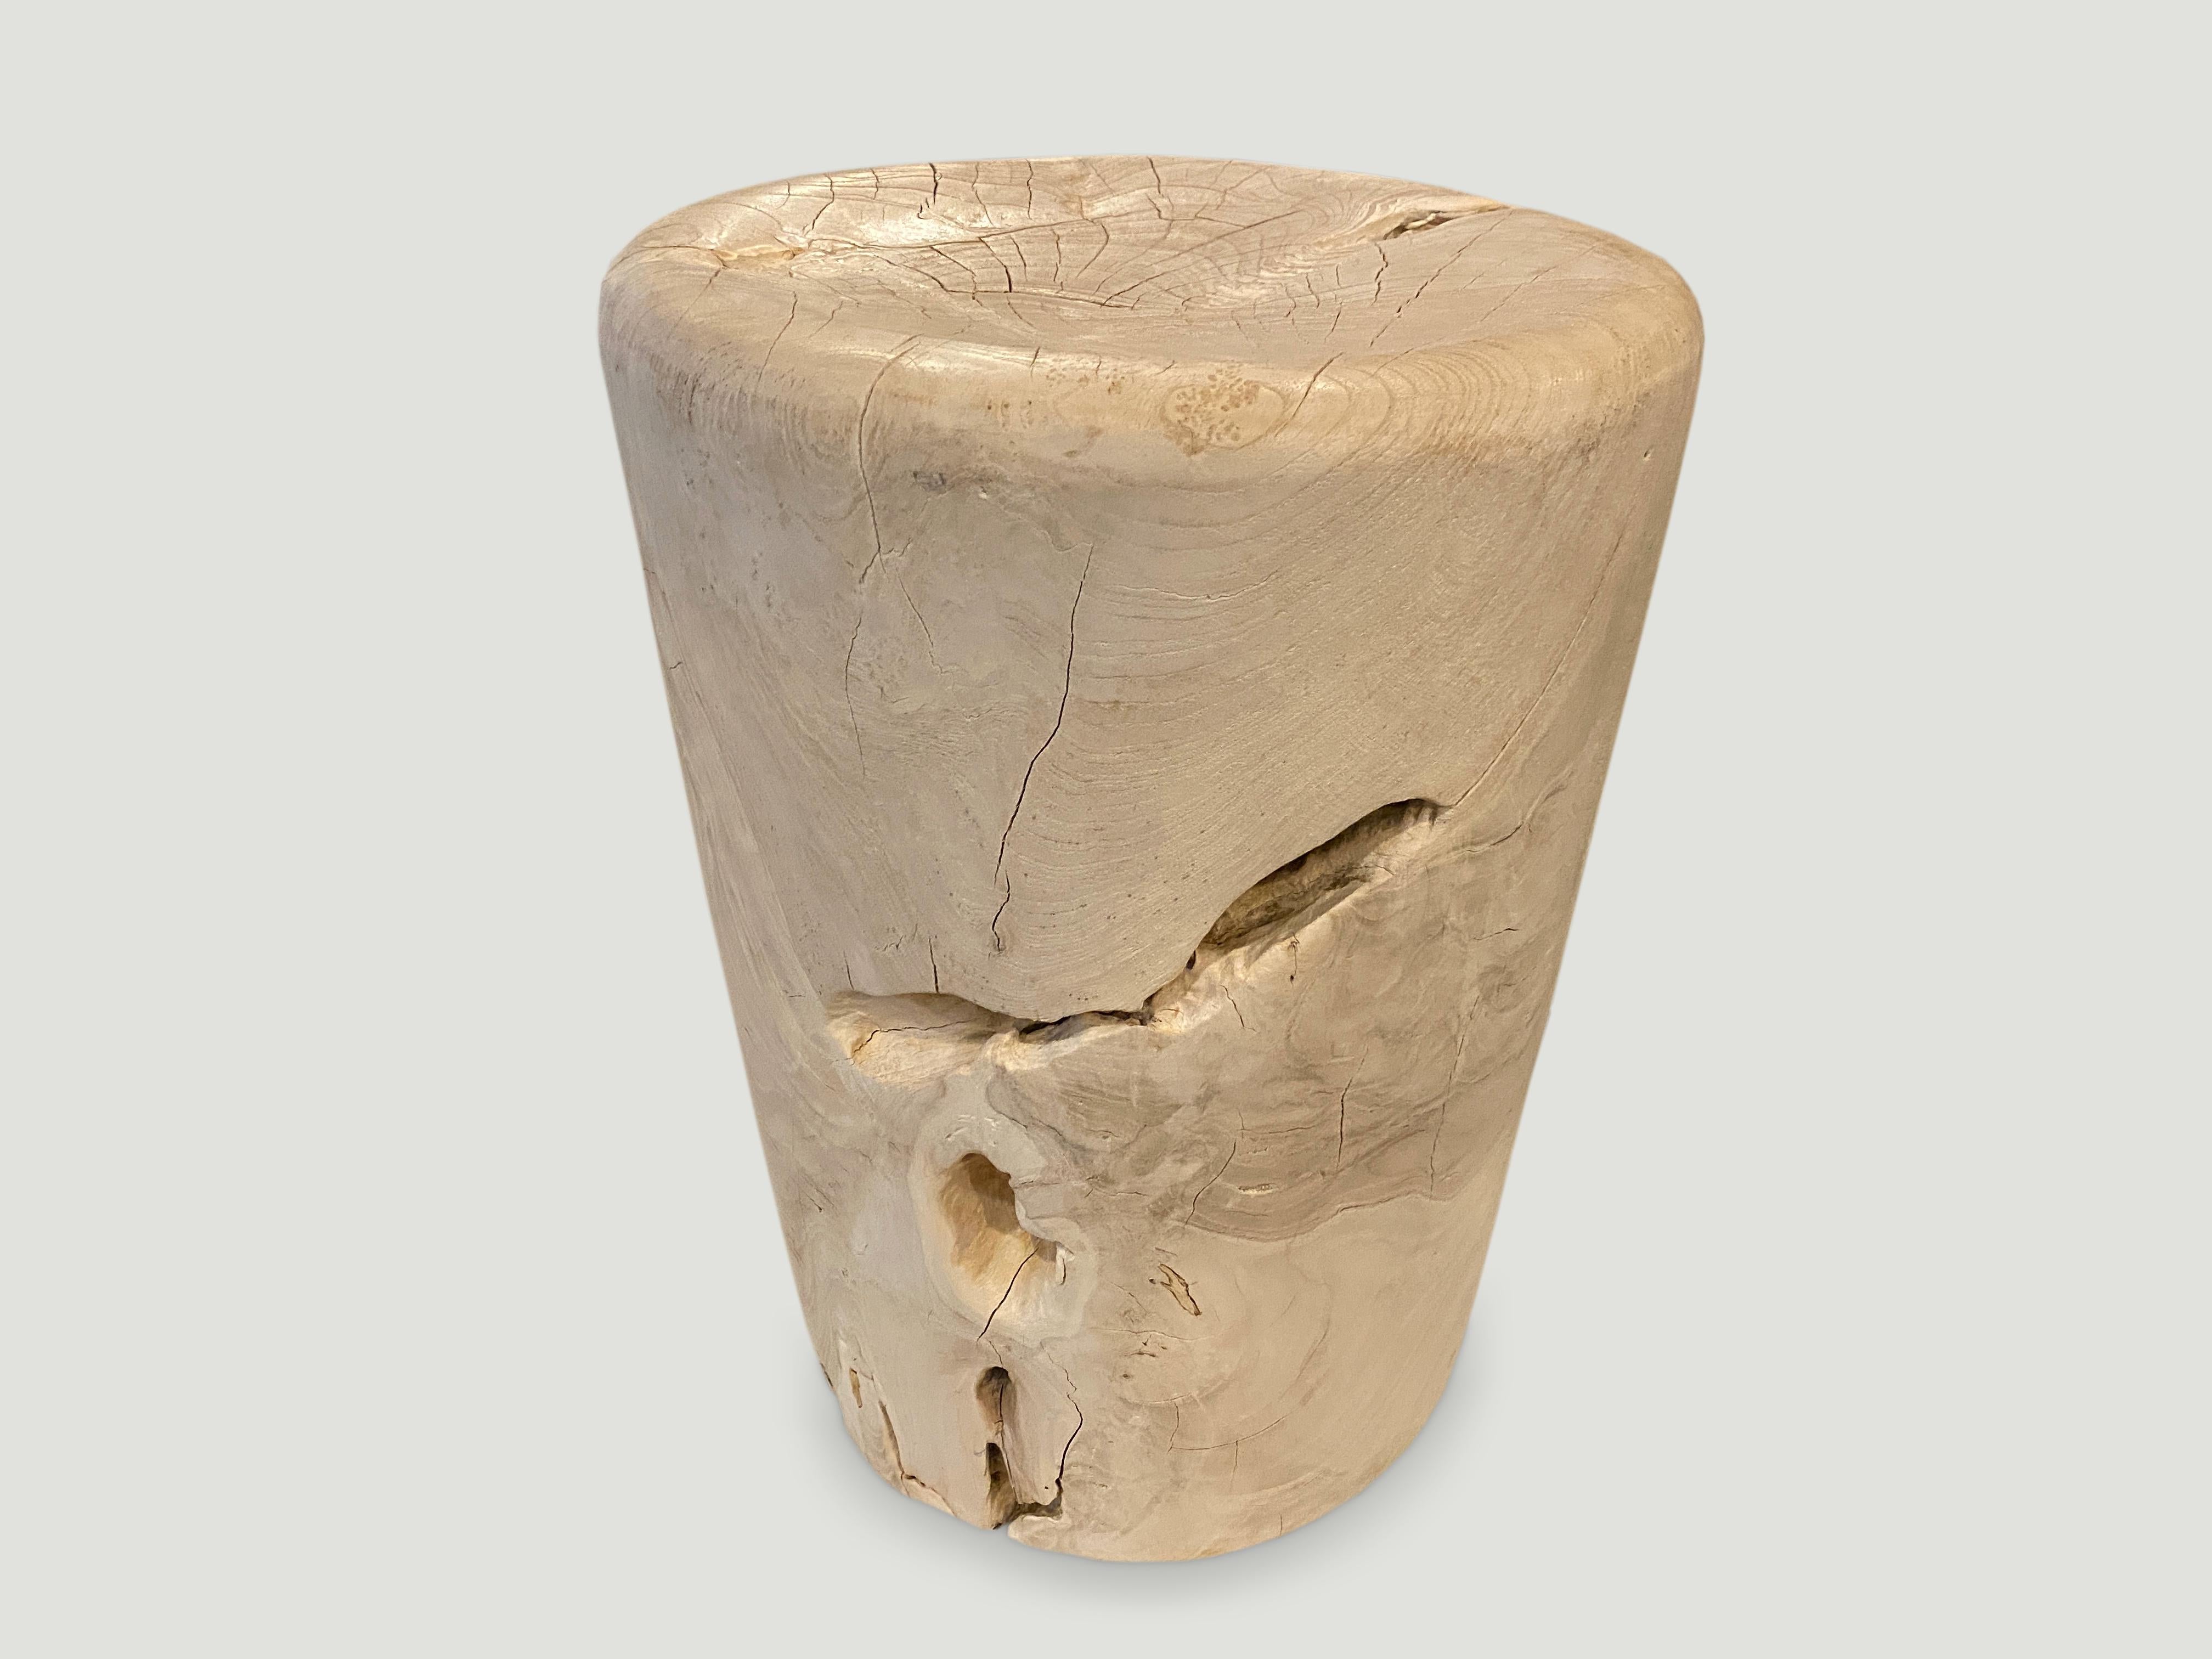 Reclaimed teak which we have hand carved into drum shaped side tables or stools and then bleached to a bone finish. Large collection available. The price reflects the one shown. Also available charred.

The St. Barts collection features an